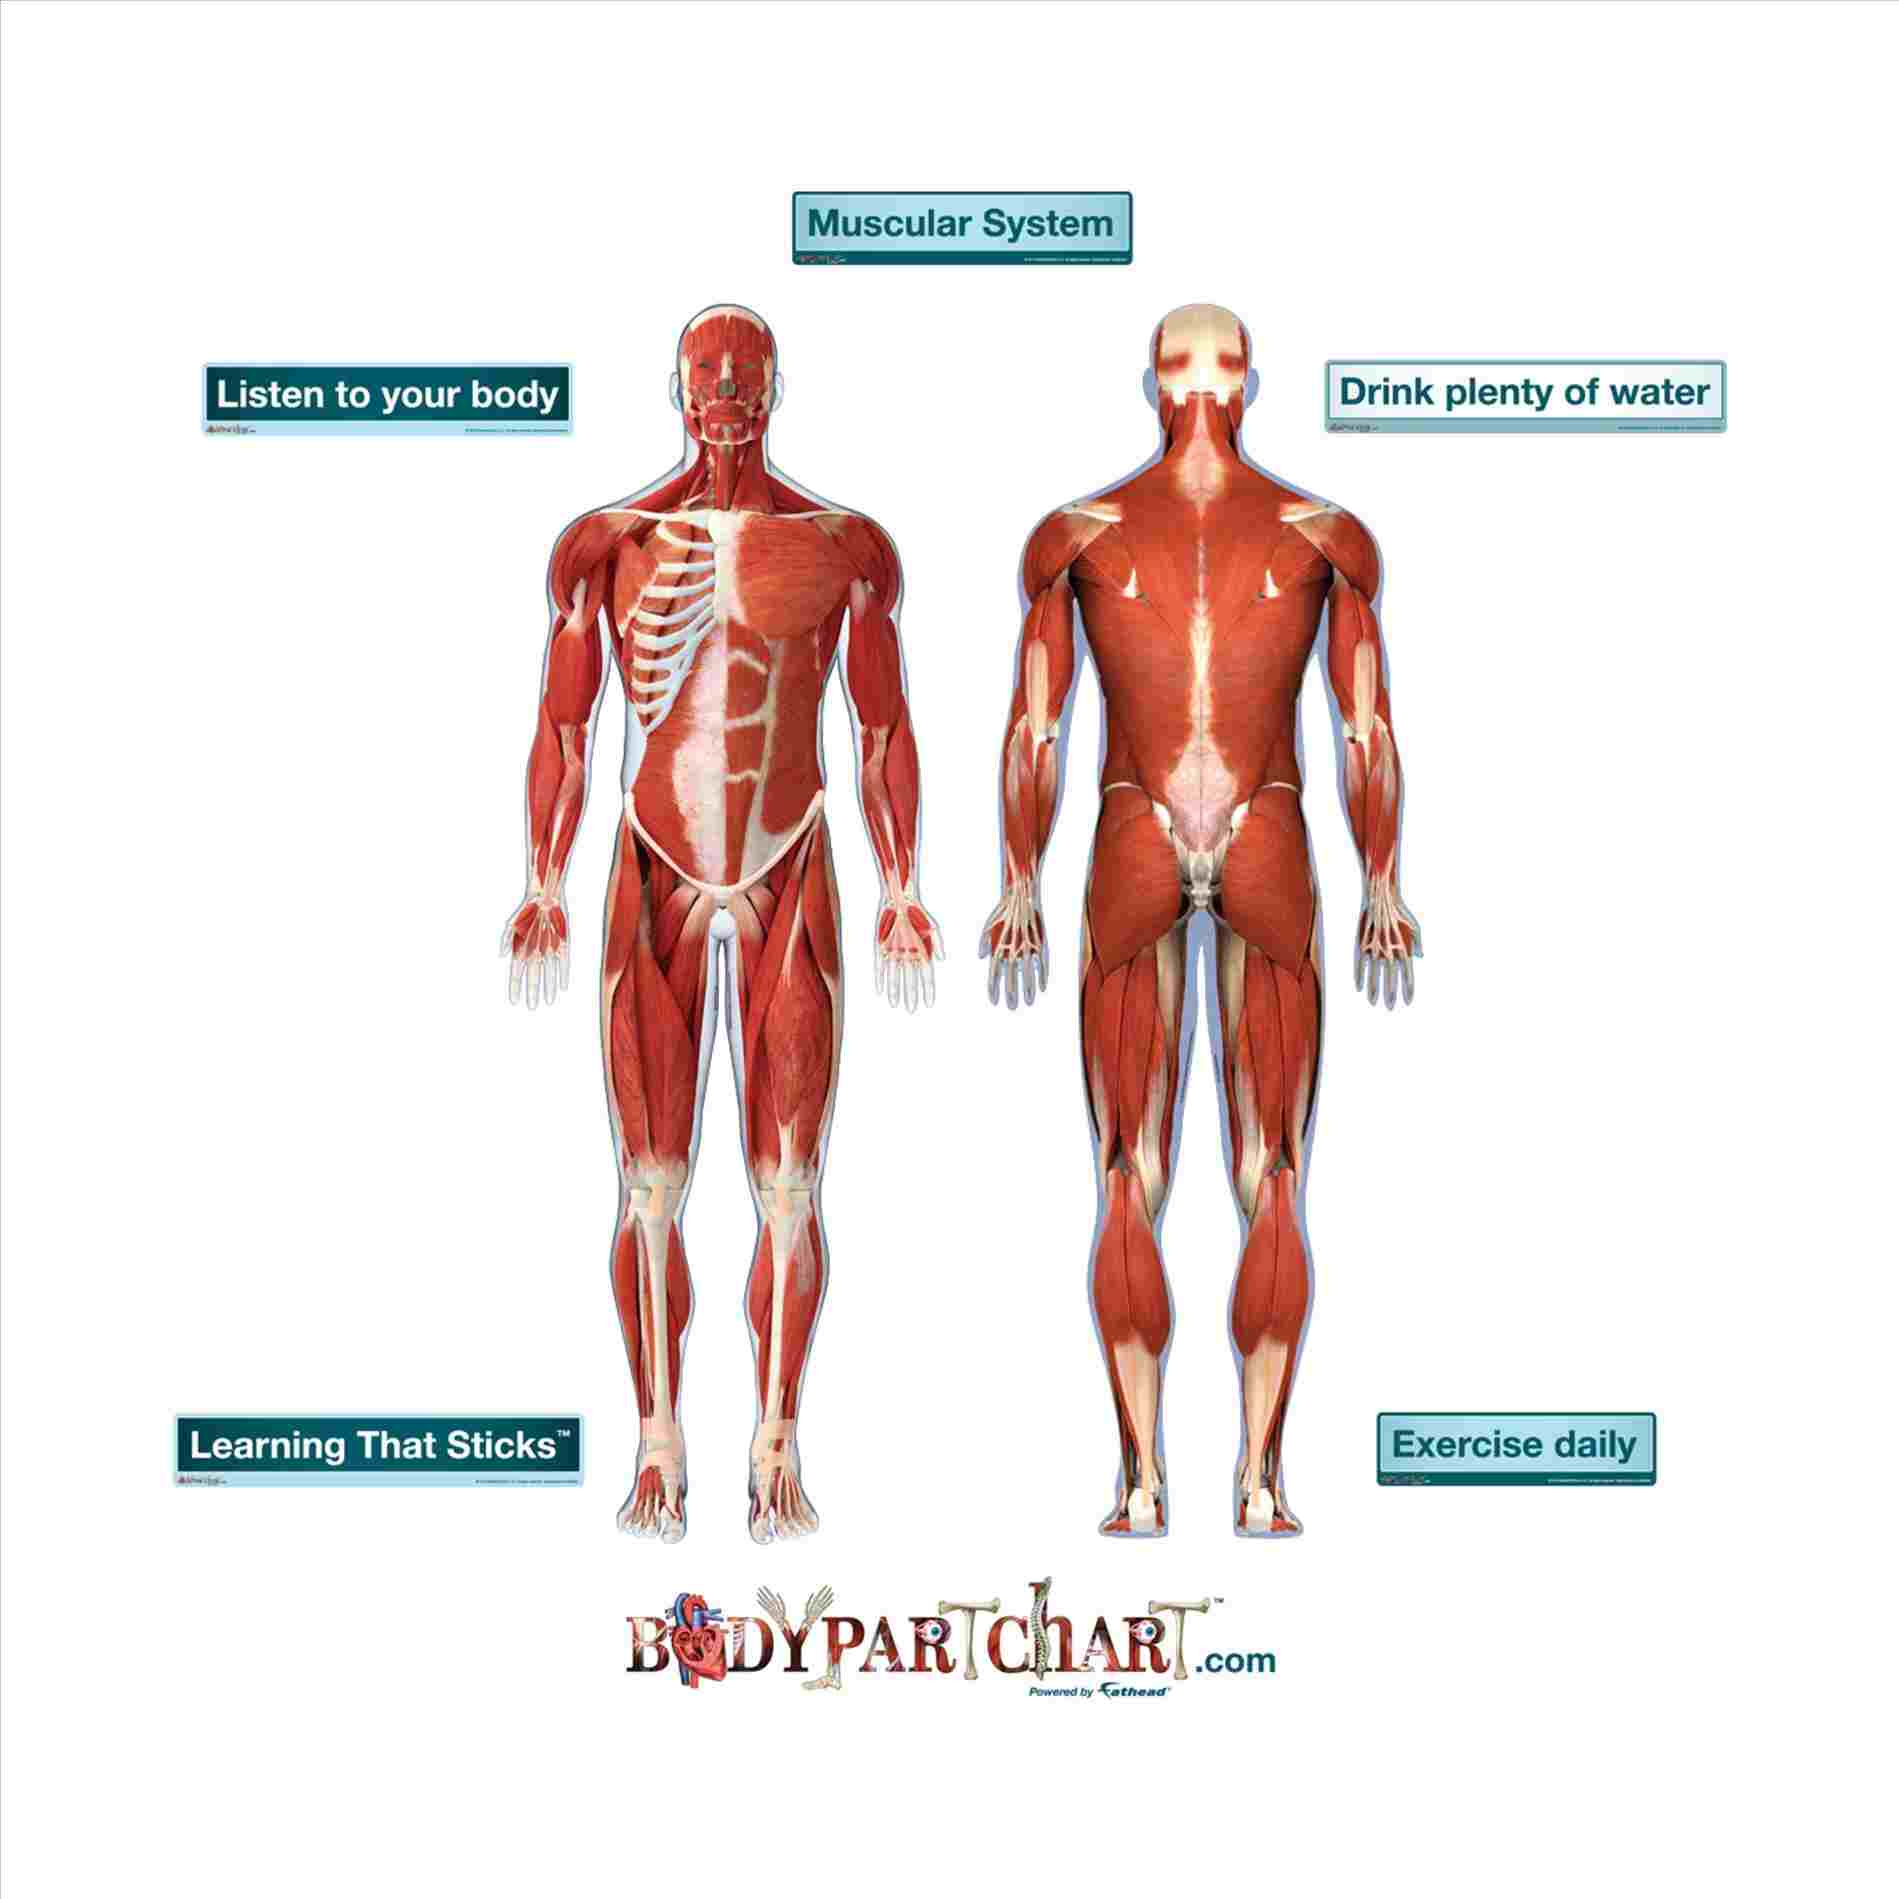 Muscular System Diagram Body Muscle System Diagram Anatomy Body